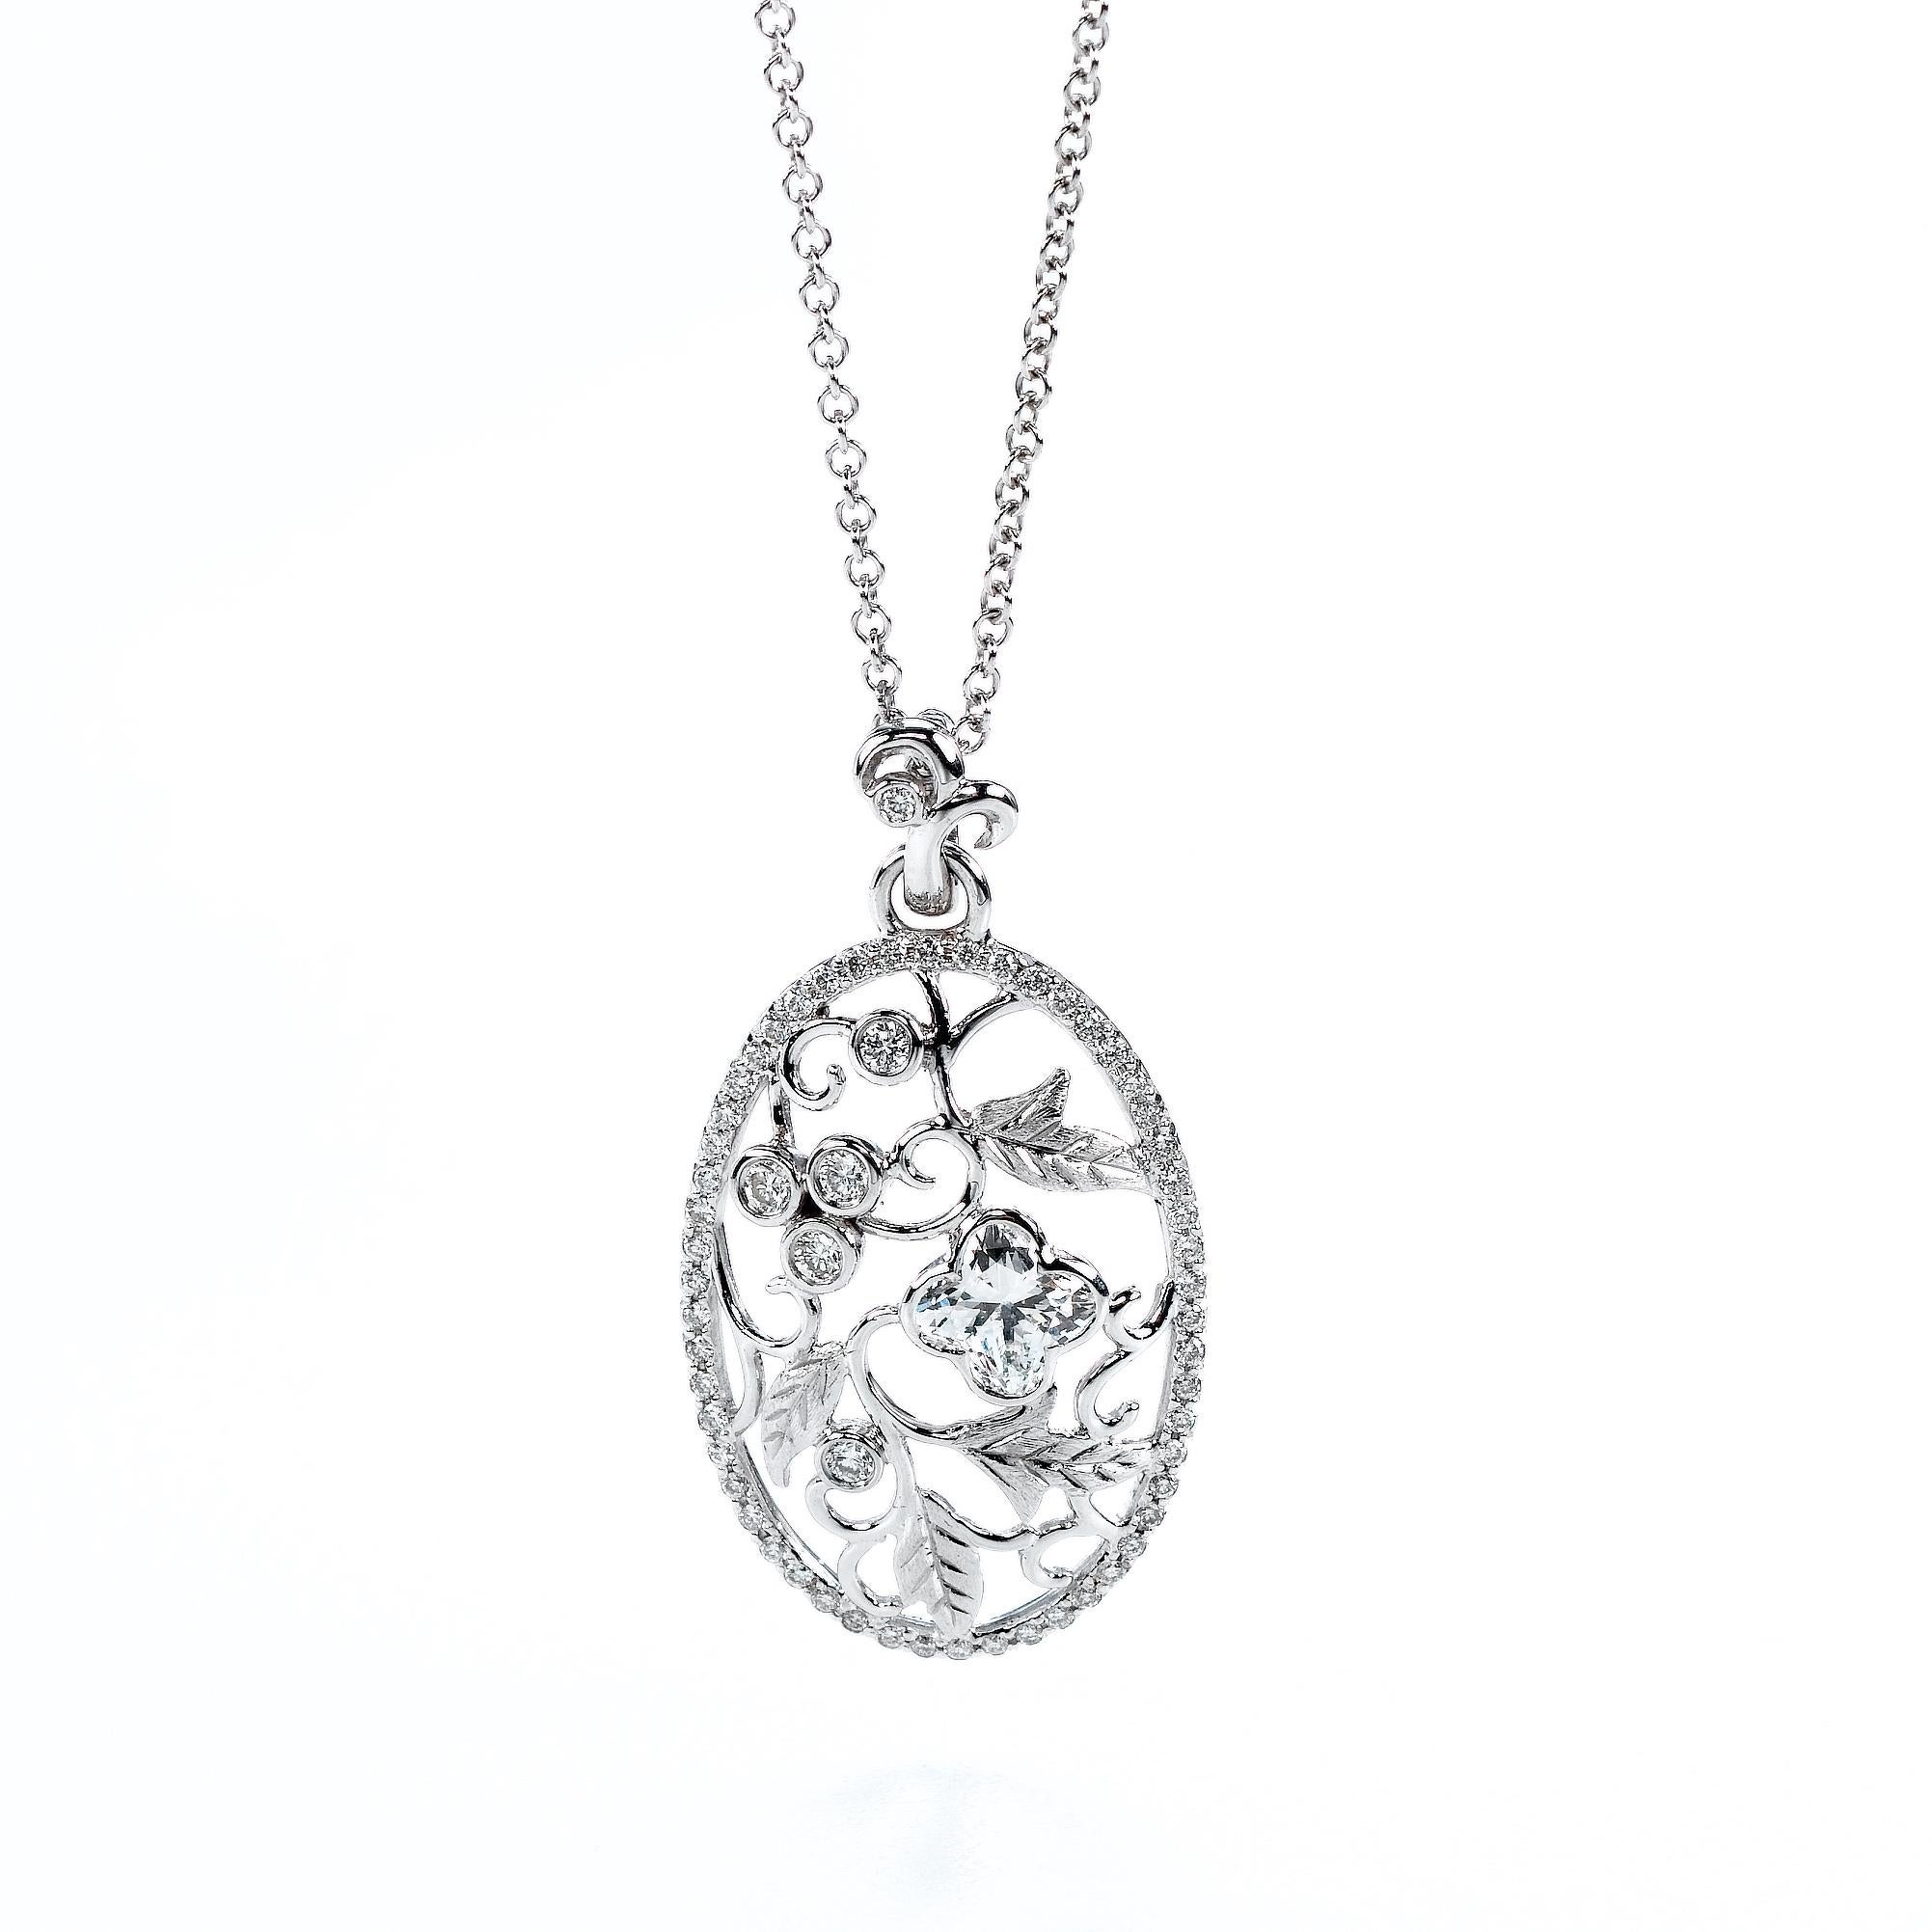 18KT white gold bouquet  diamond flower pendant.  .1 LILY CUT ® flower shape diamond H color VS SI clarity  0.50cts . additional 0.37 ct round diamond accent . overall length of drop 1.5 inch. 3.2 cm .  overall size 17 inch necklace with a 1.5 inch